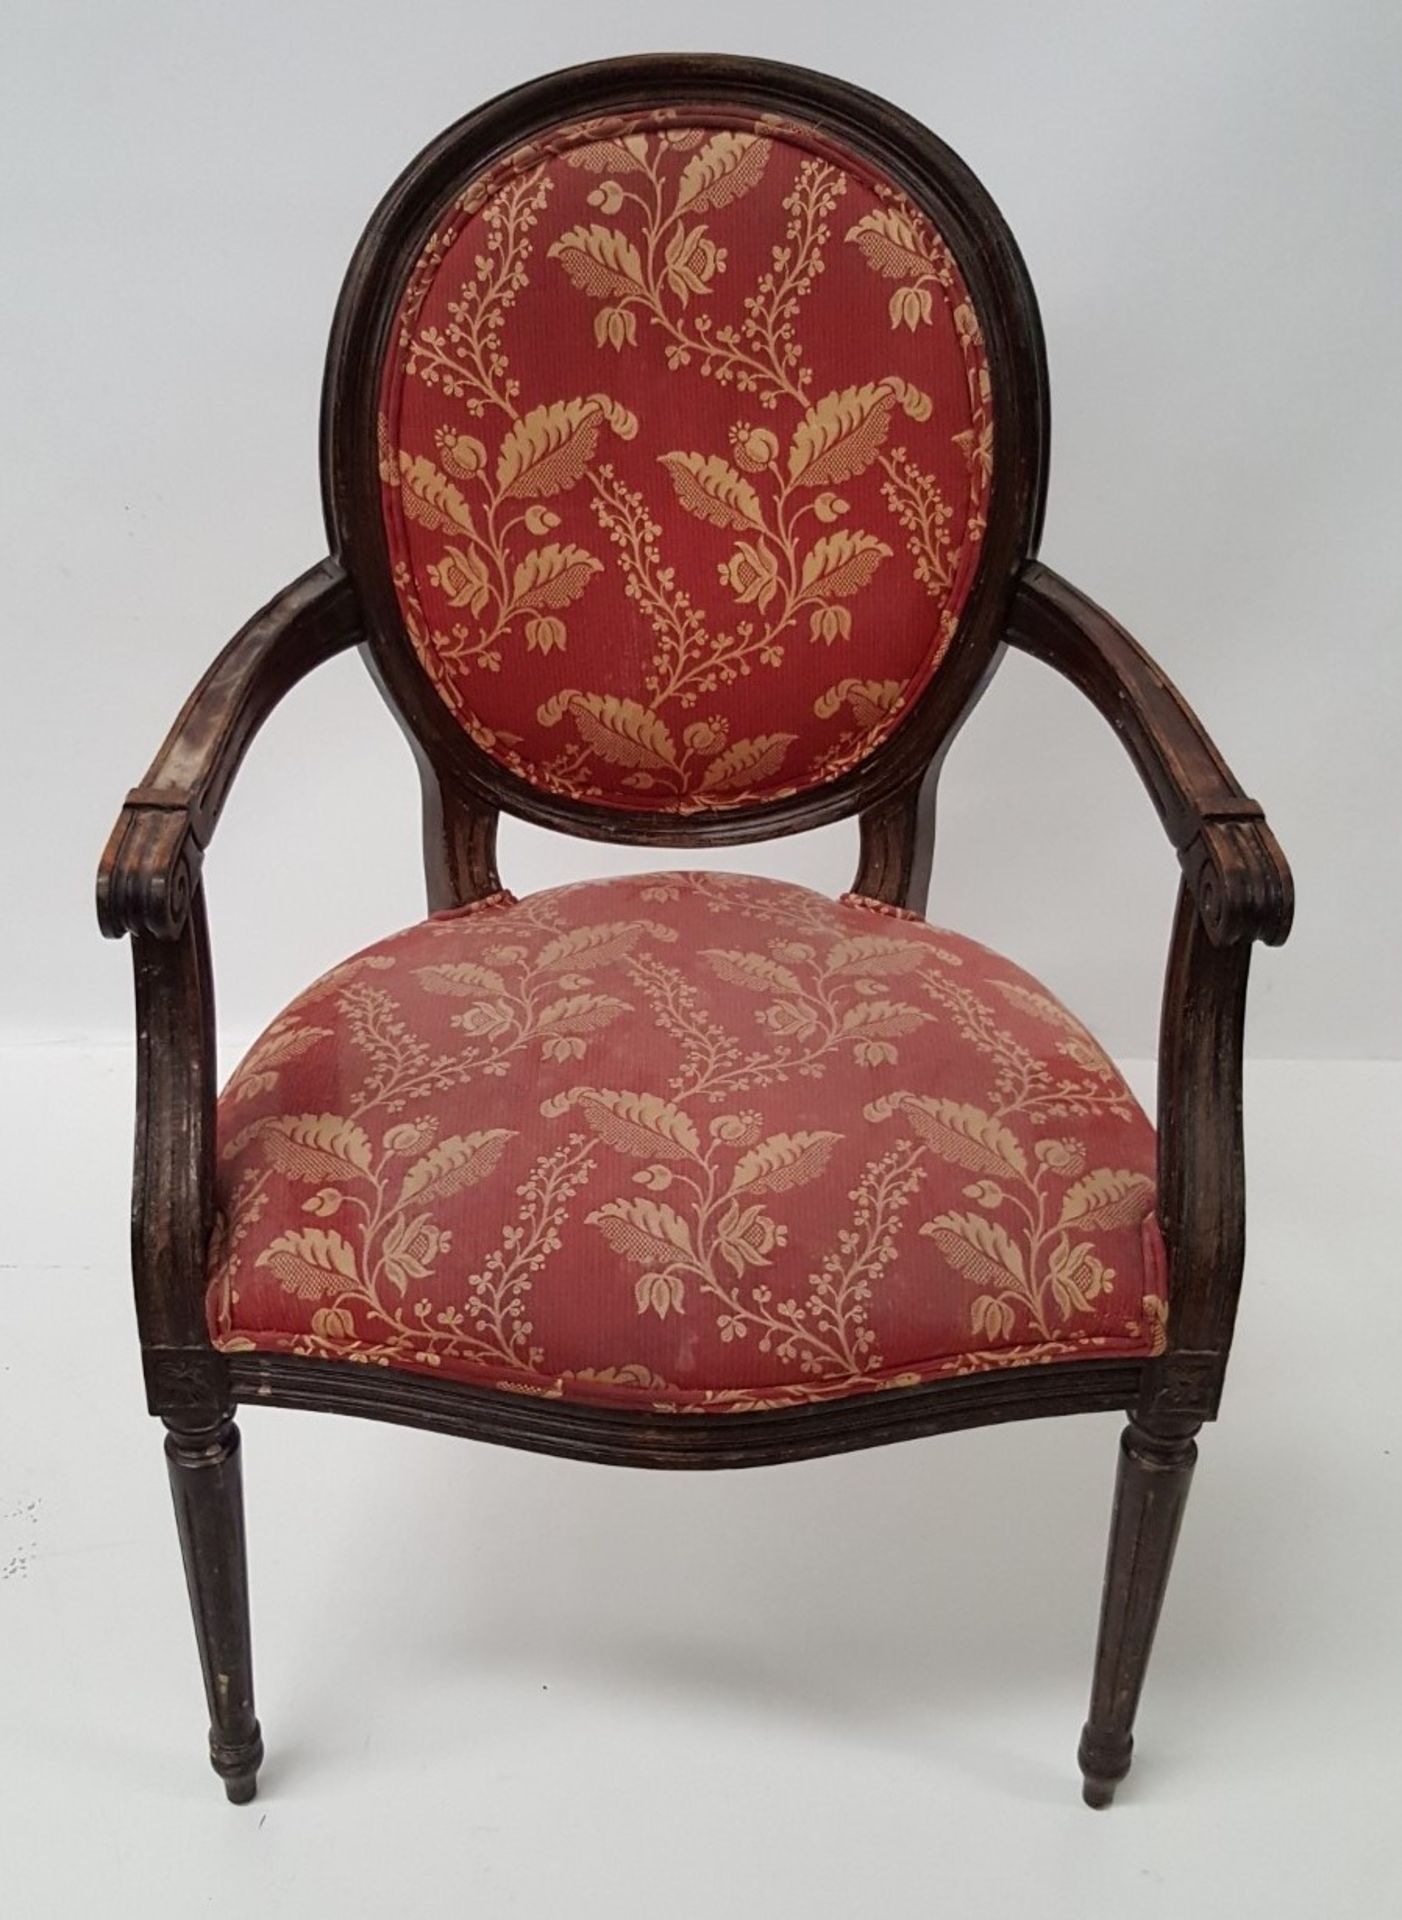 8 x Vintage Wooden Chairs Featuring Spindle Legs, And Upholstered In Red / Gold Floral Fabric - - Image 8 of 8